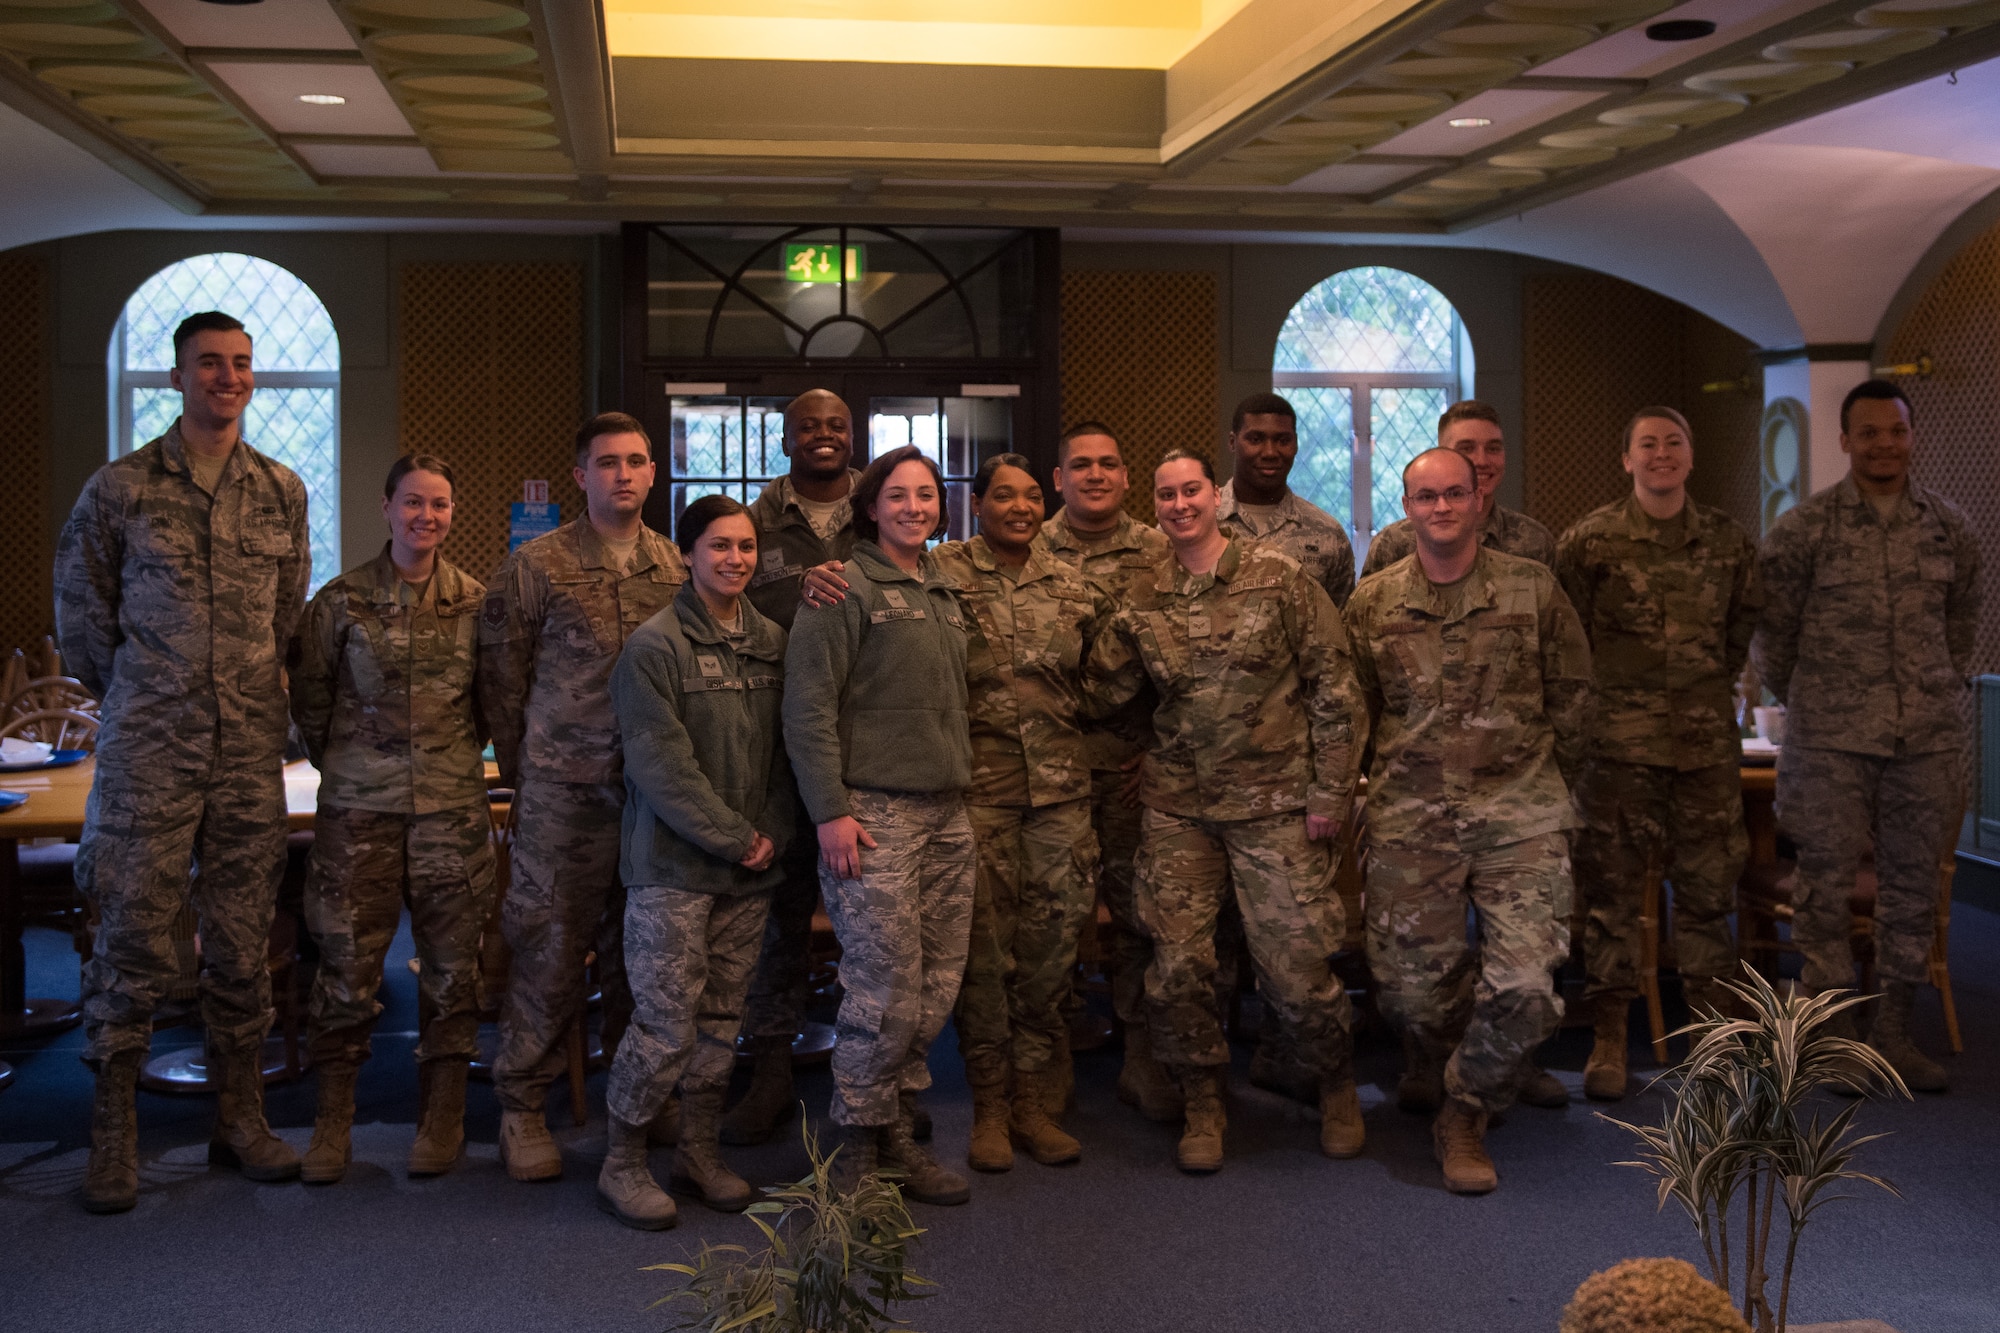 Airmen deployed from Barksdale Air Force Base, La., pose for a photo with Chief Master Sgt. Melvina Smith, Eighth Air Force command chief, at RAF Fairford, England, April 4, 2019. The group of Airmen were selected to have lunch with Smith during her visit to the base. (U.S. Air Force photo by Airman 1st Class Tessa B. Corrick)